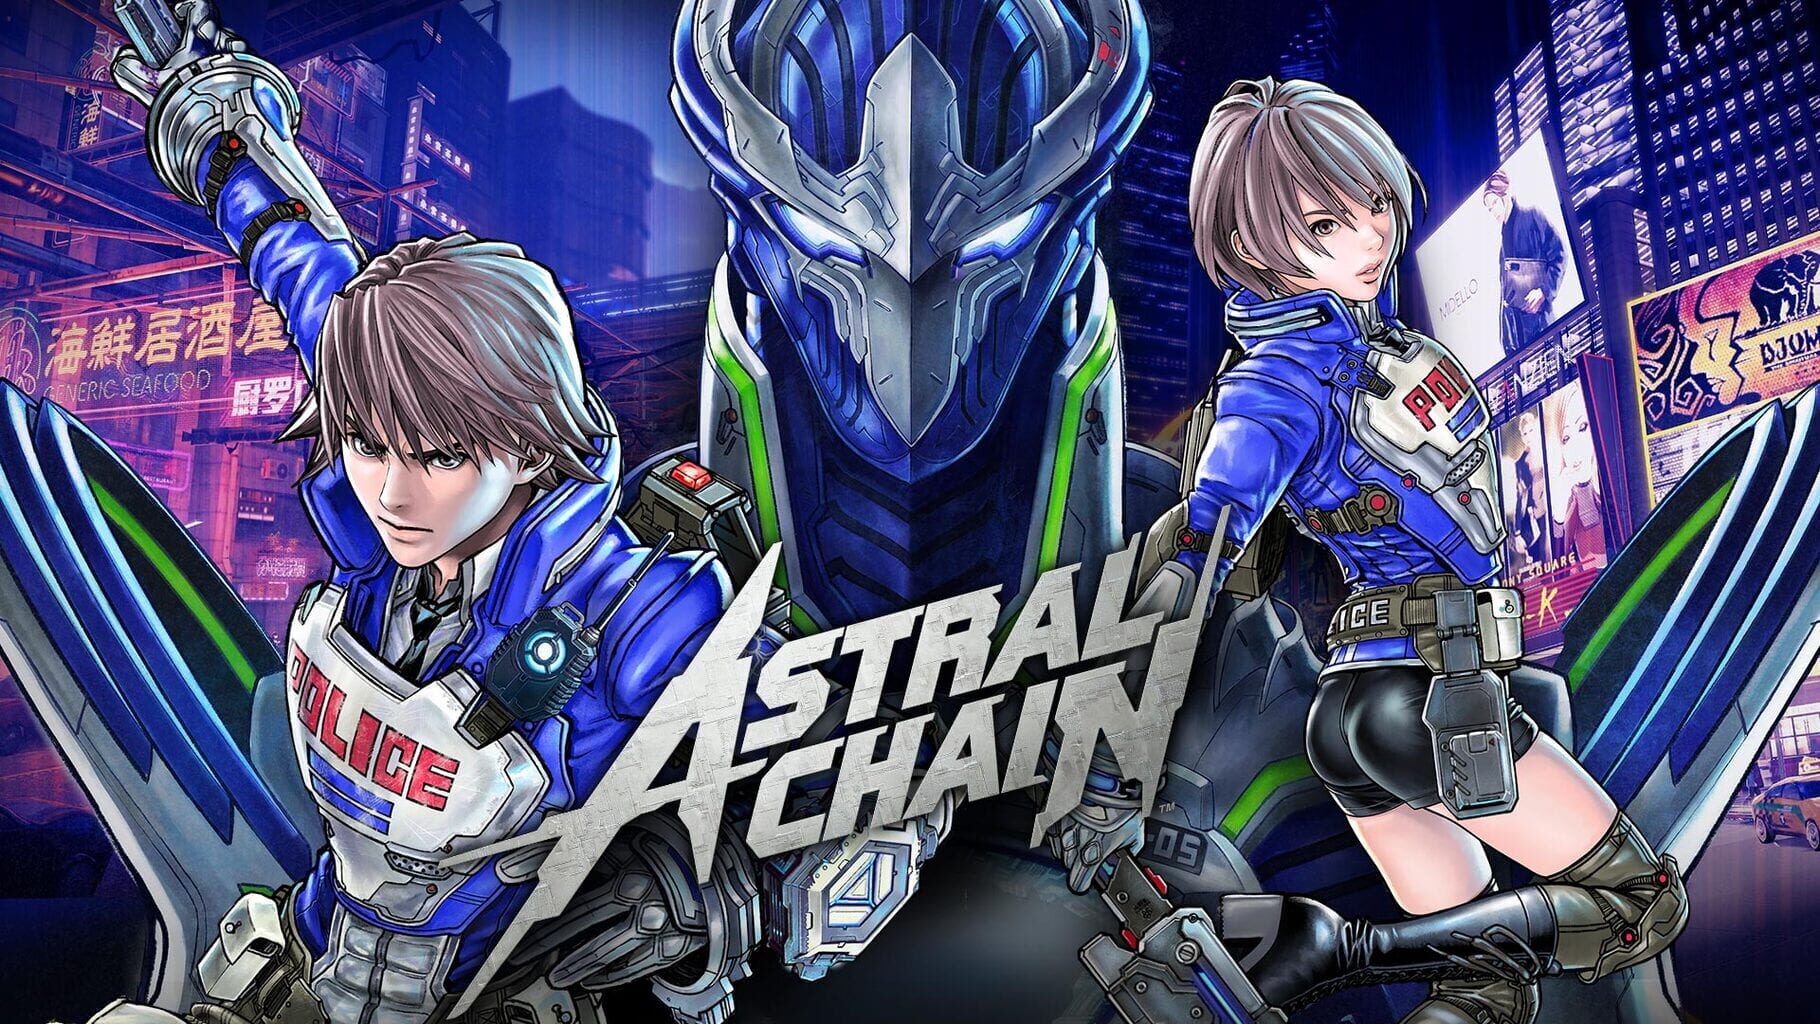 Artwork for Astral Chain